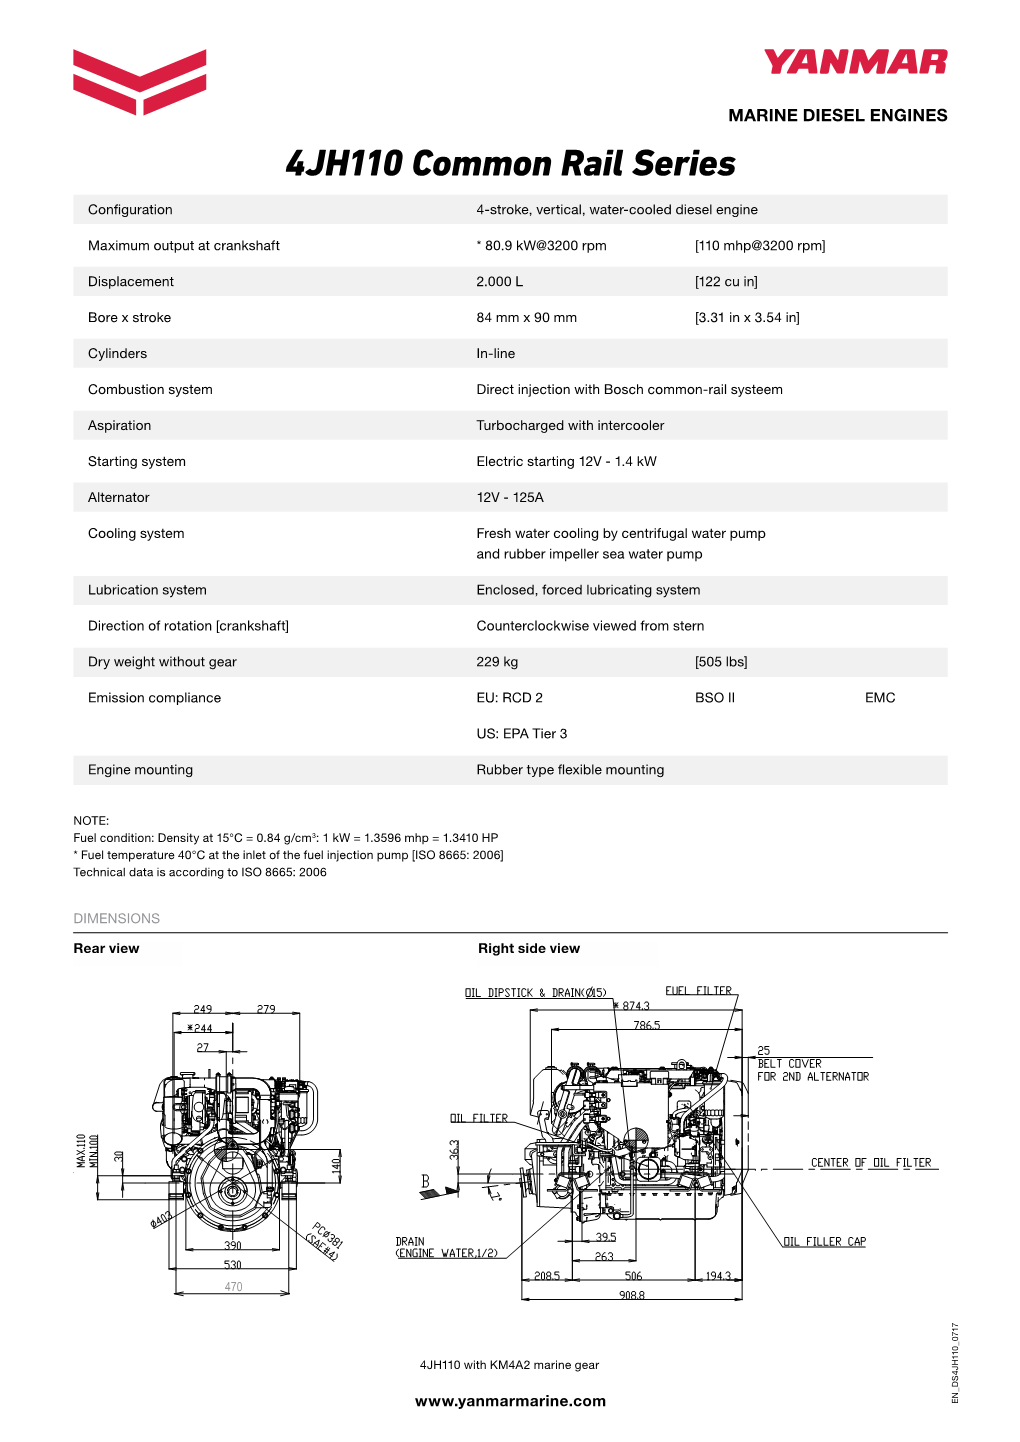 Yanmar 4JH110 Common Rail Series Specifications